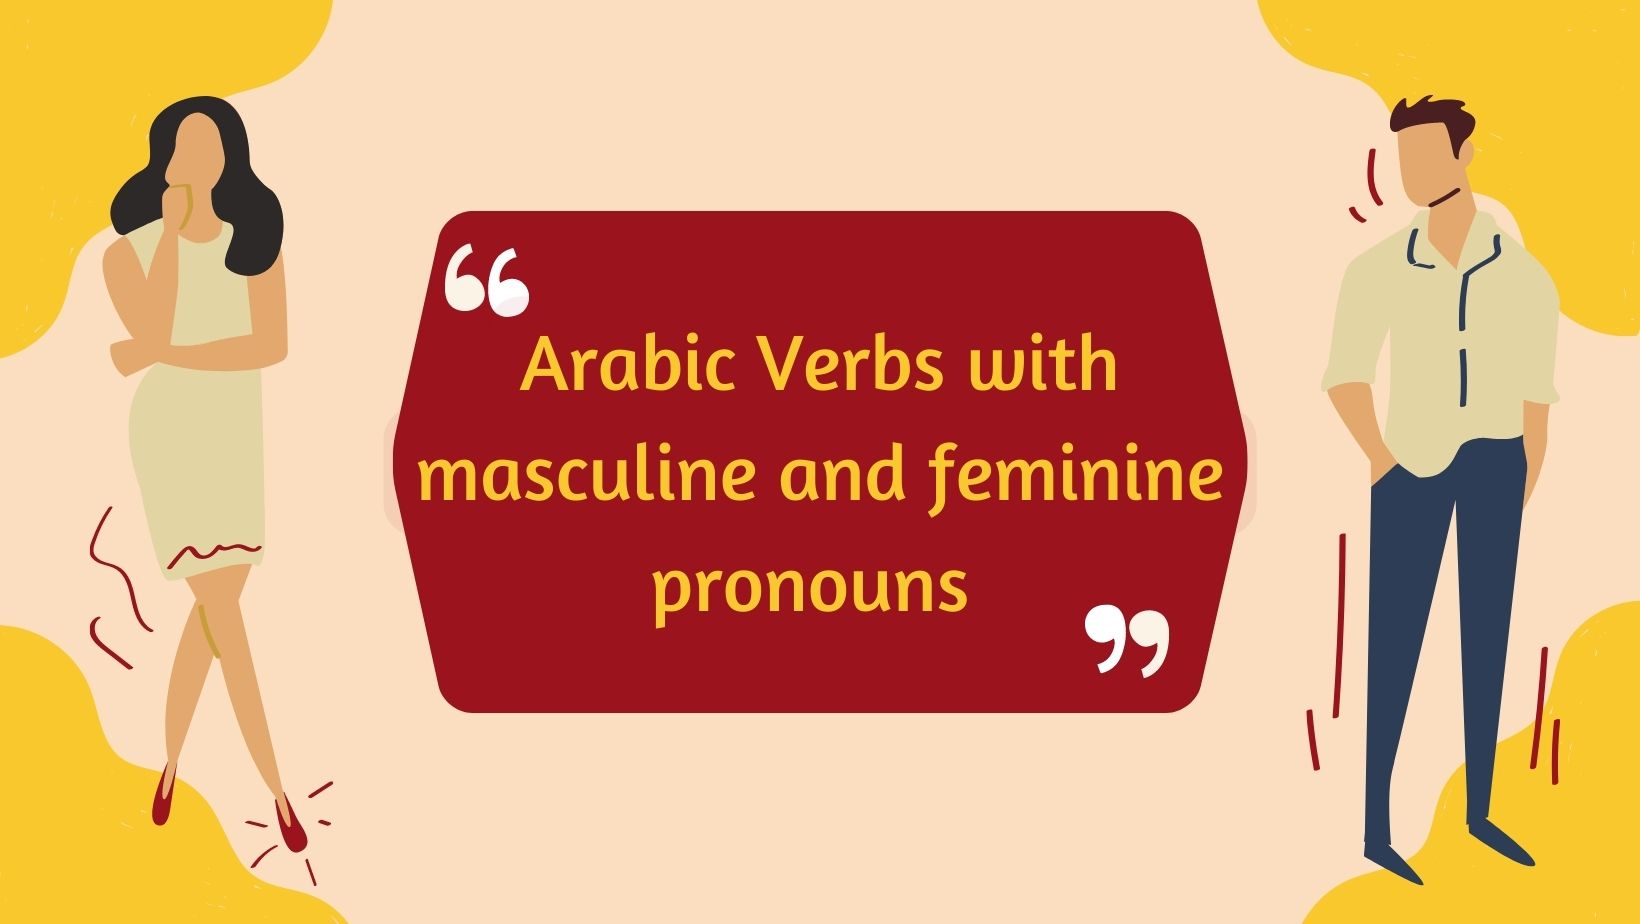 Arabic Verbs with masculine and feminine pronouns